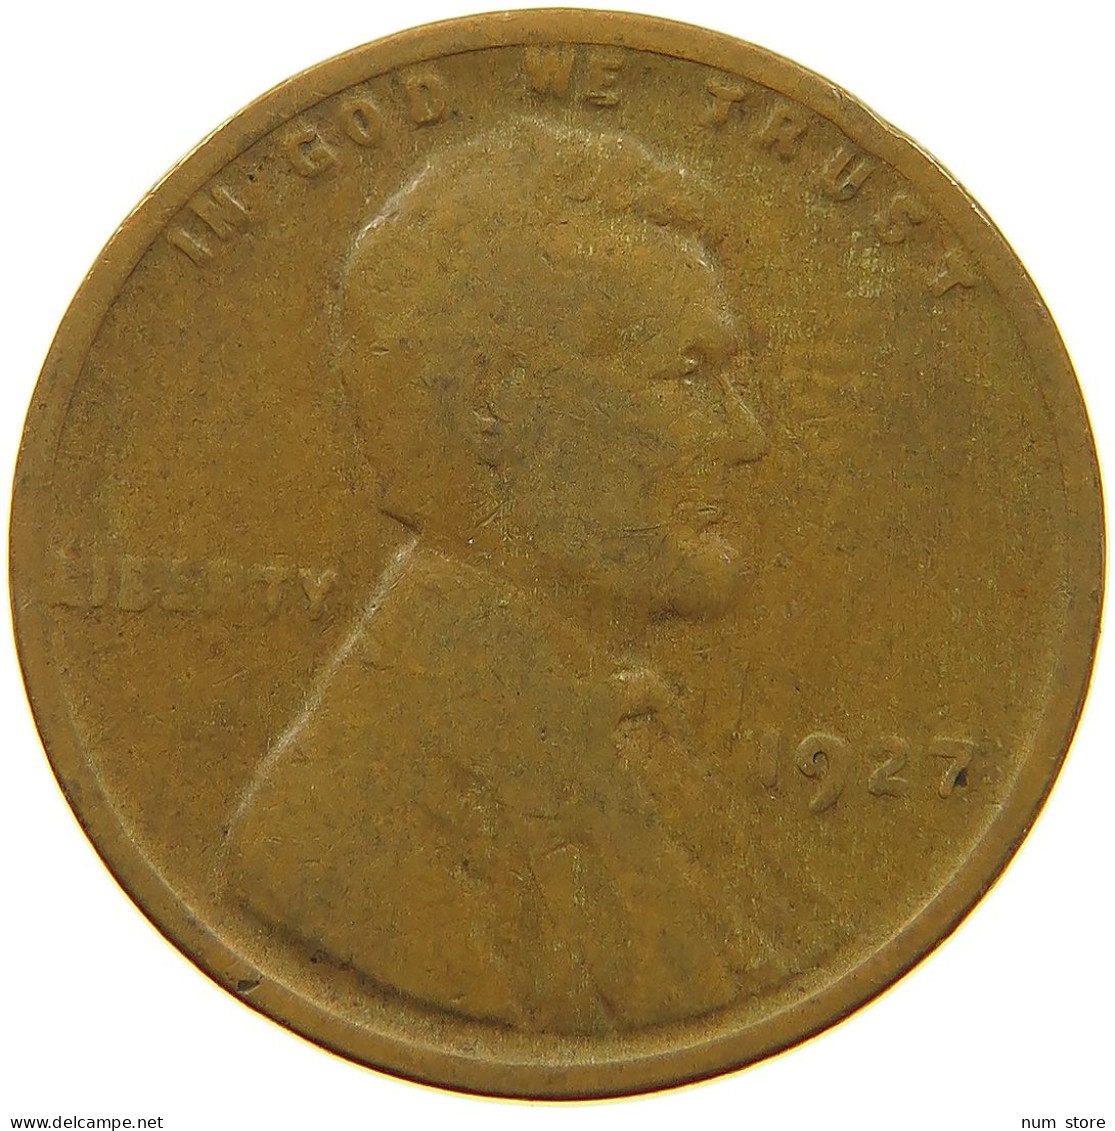 UNITED STATES OF AMERICA CENT 1927 LINCOLN WHEAT #s063 0771 - 1909-1958: Lincoln, Wheat Ears Reverse